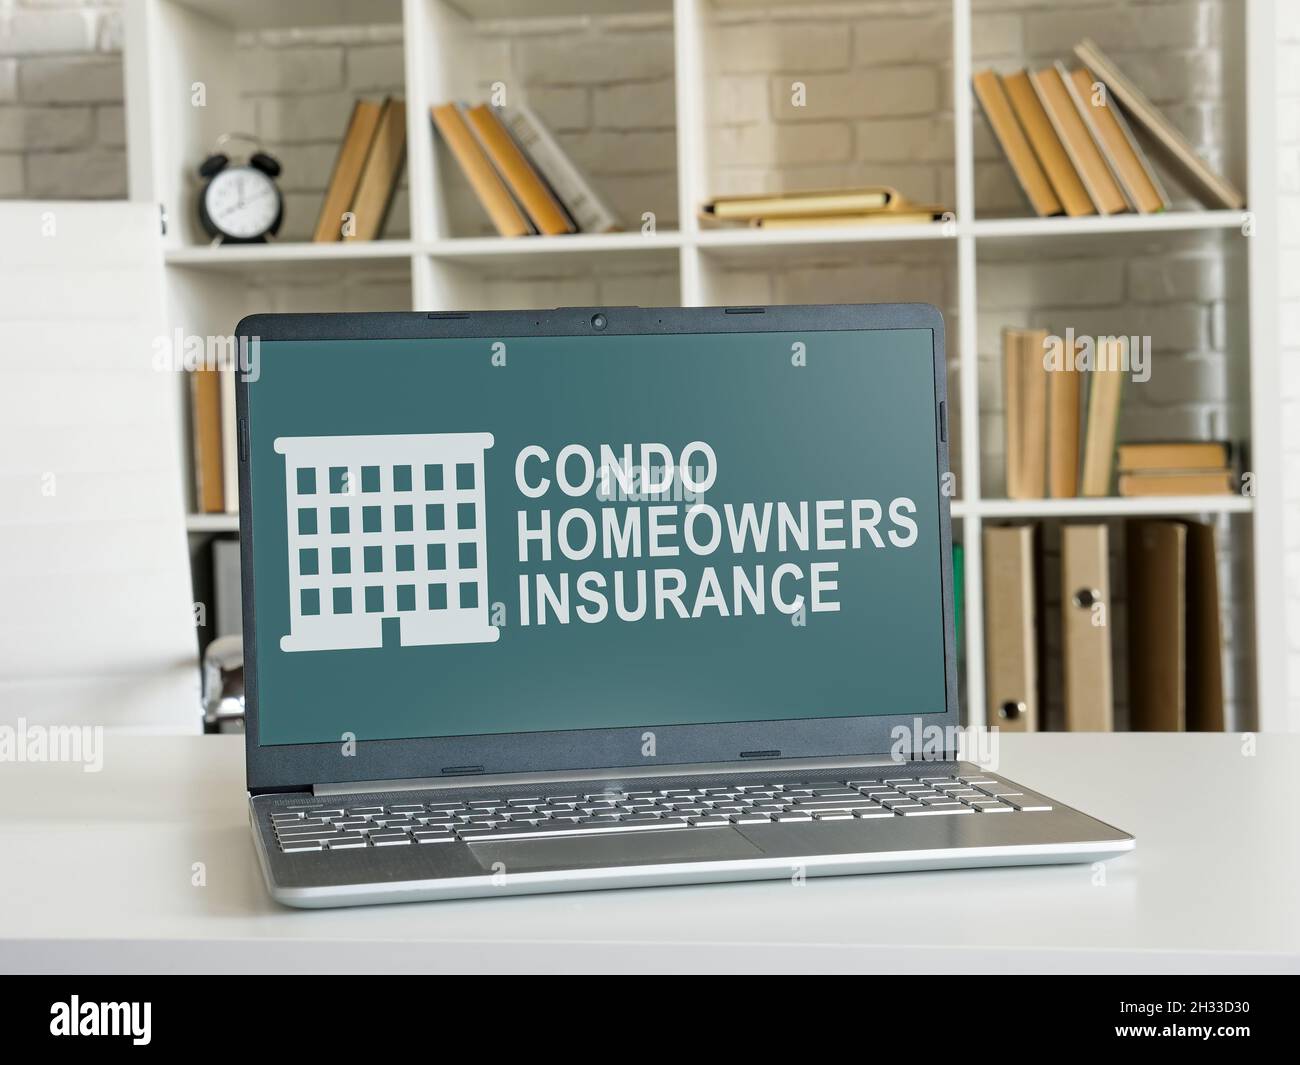 Condo homeowners insurance on the laptop in the office. Stock Photo